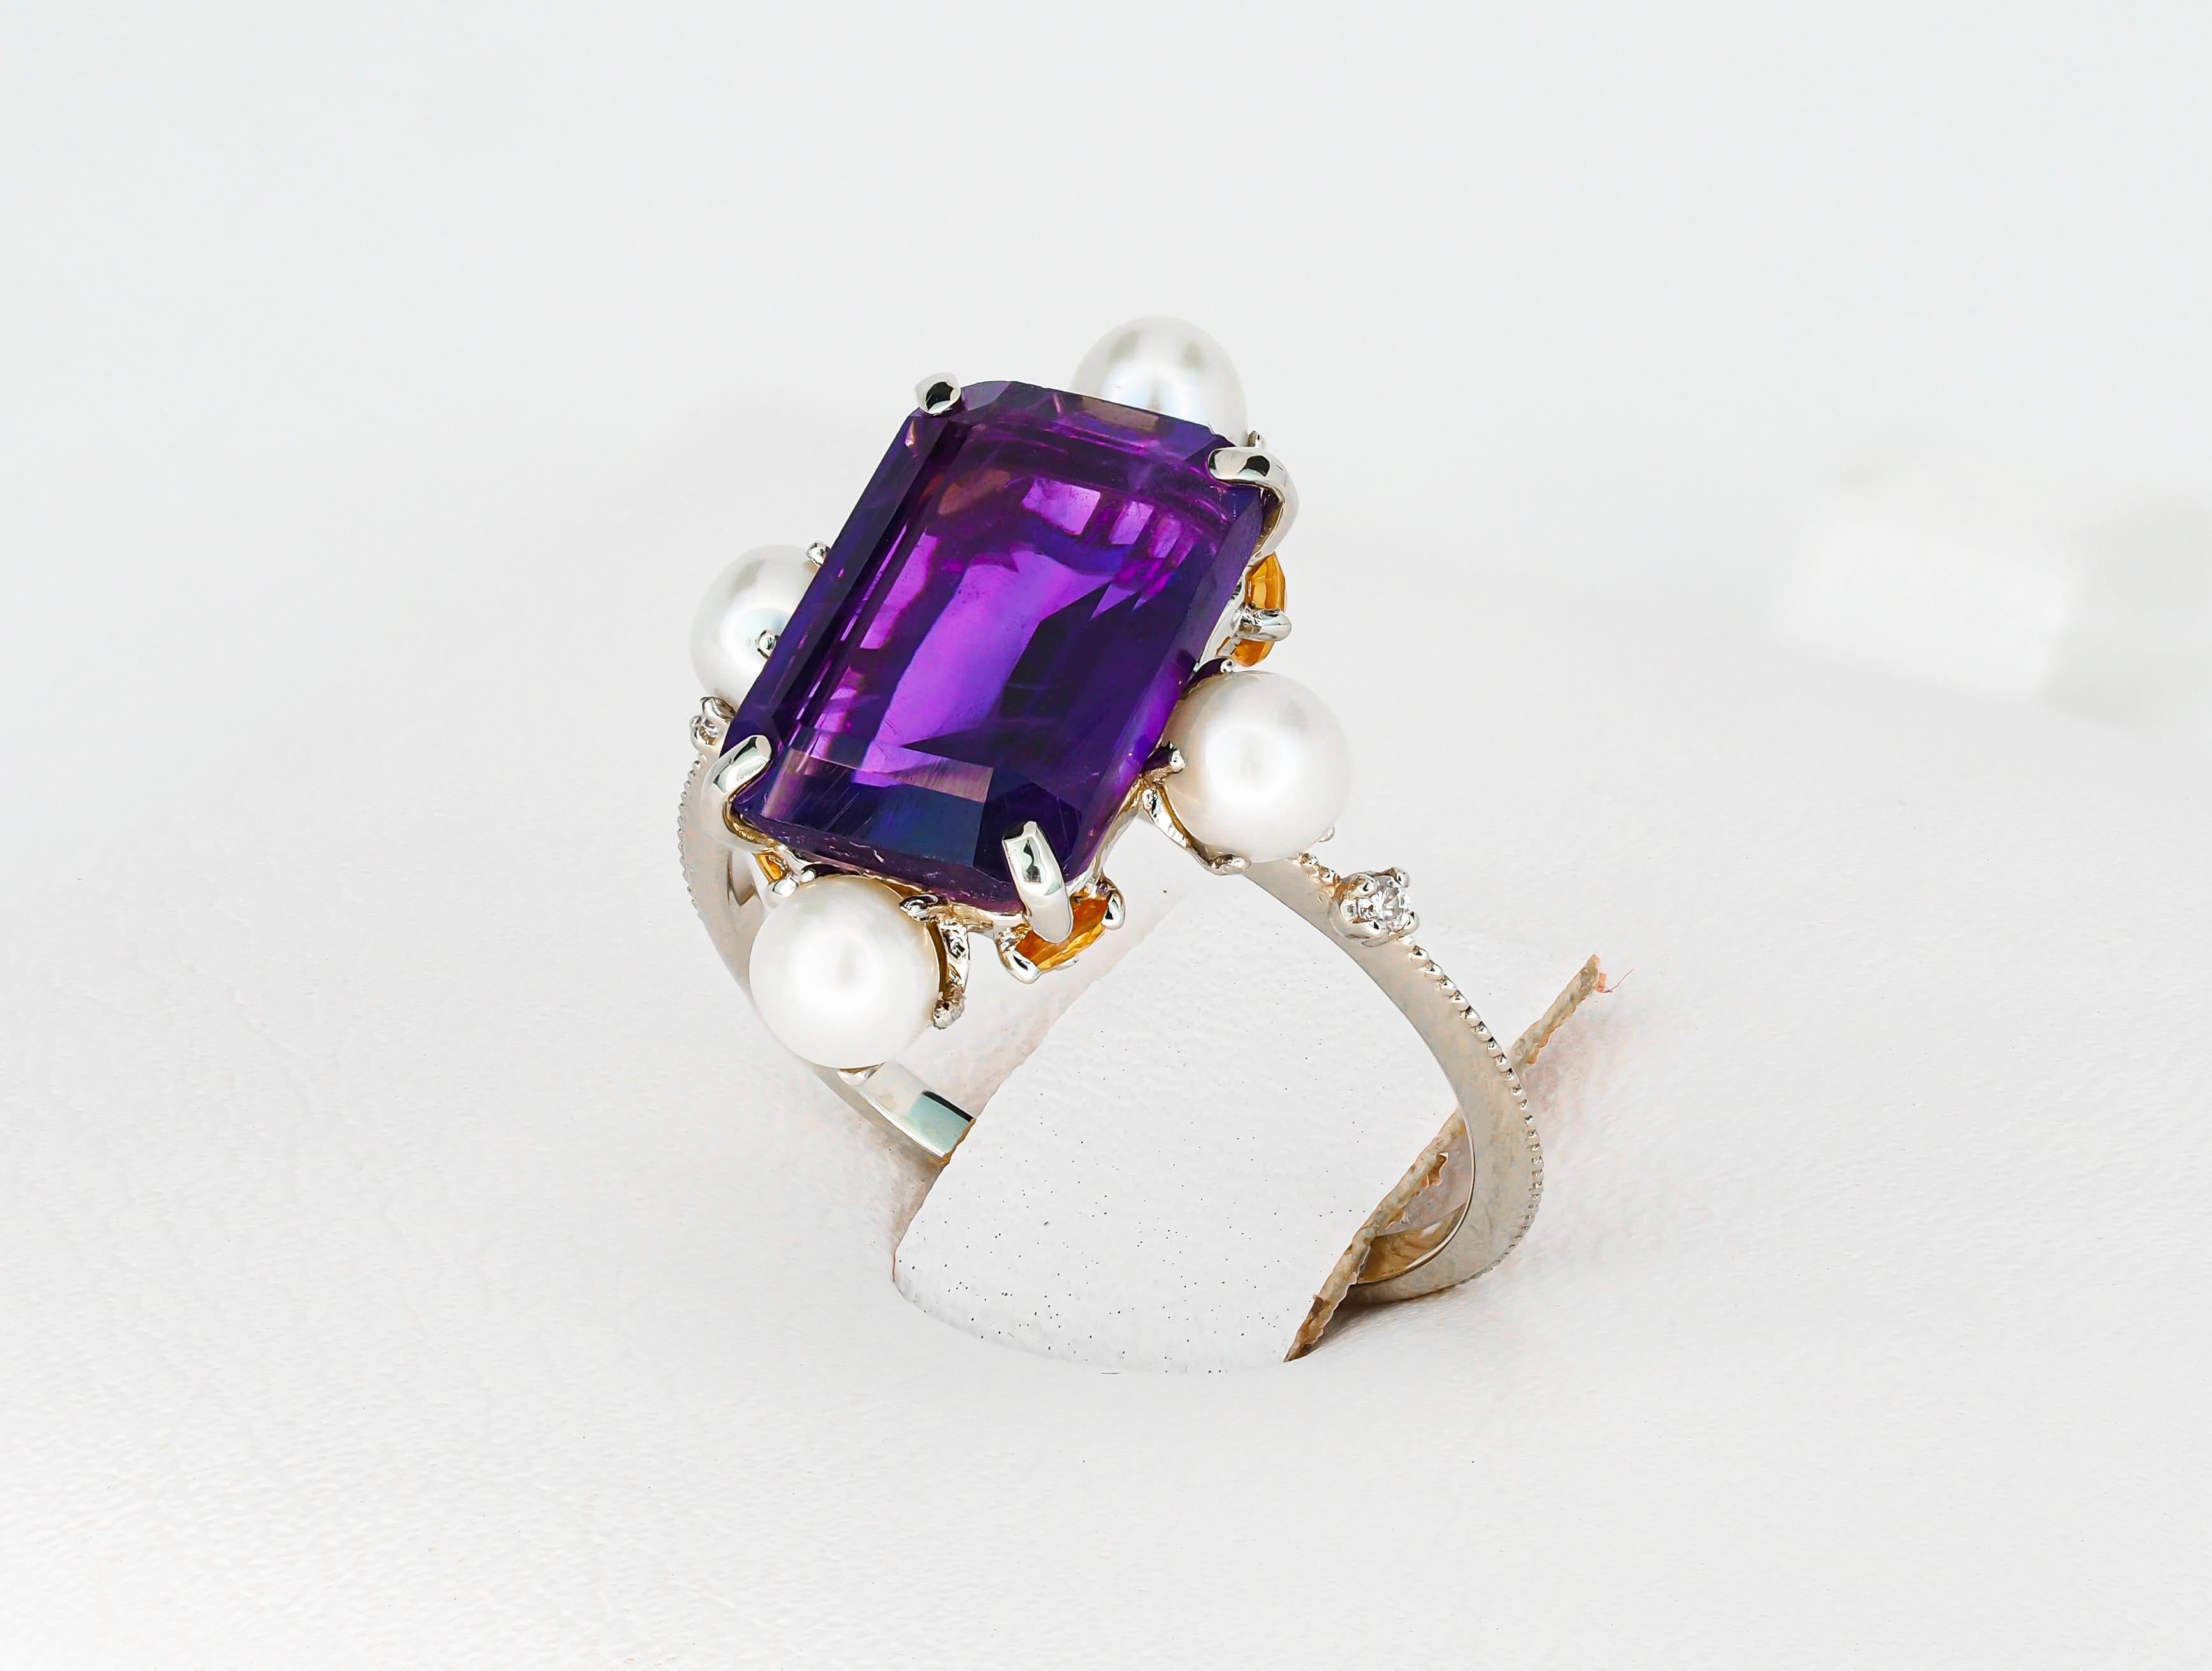 For Sale:  Amethyst ring in 14k gold.  3